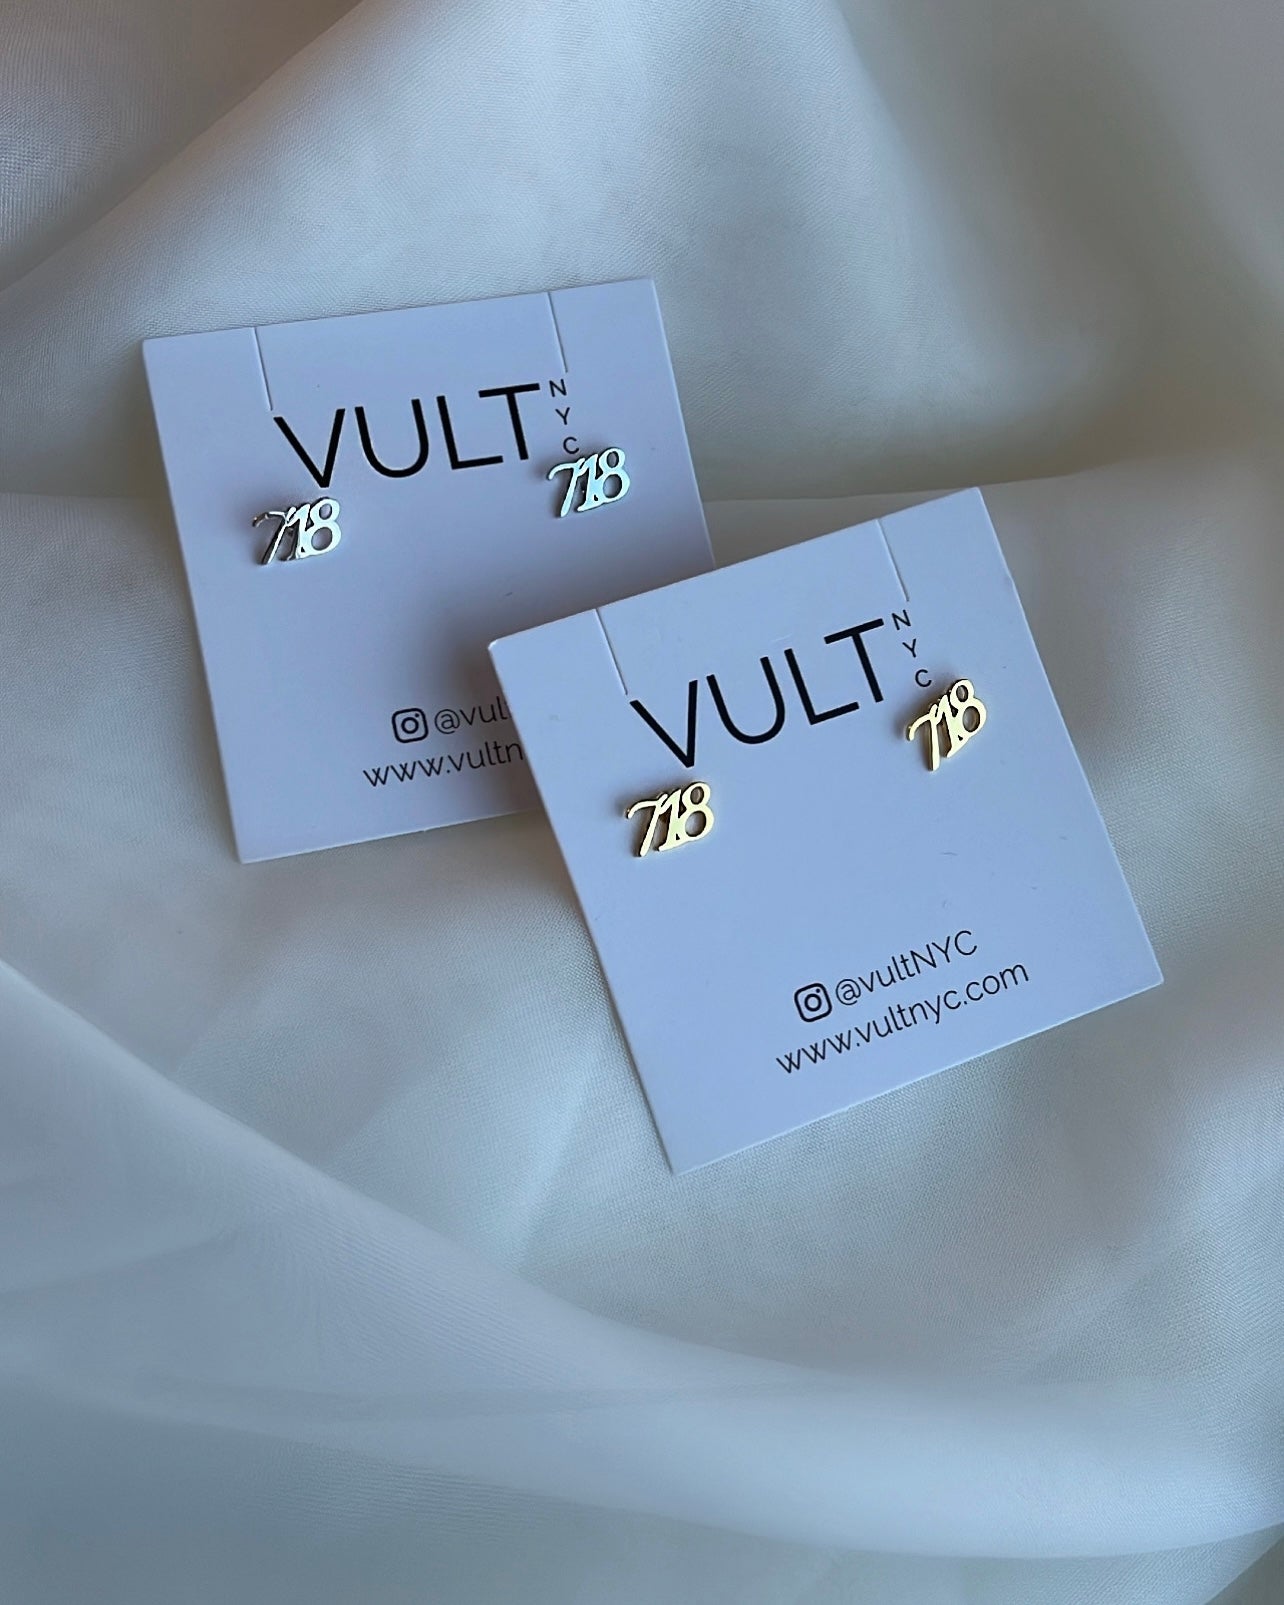 Essential V Stud Earrings in Gold - Accessories M68153